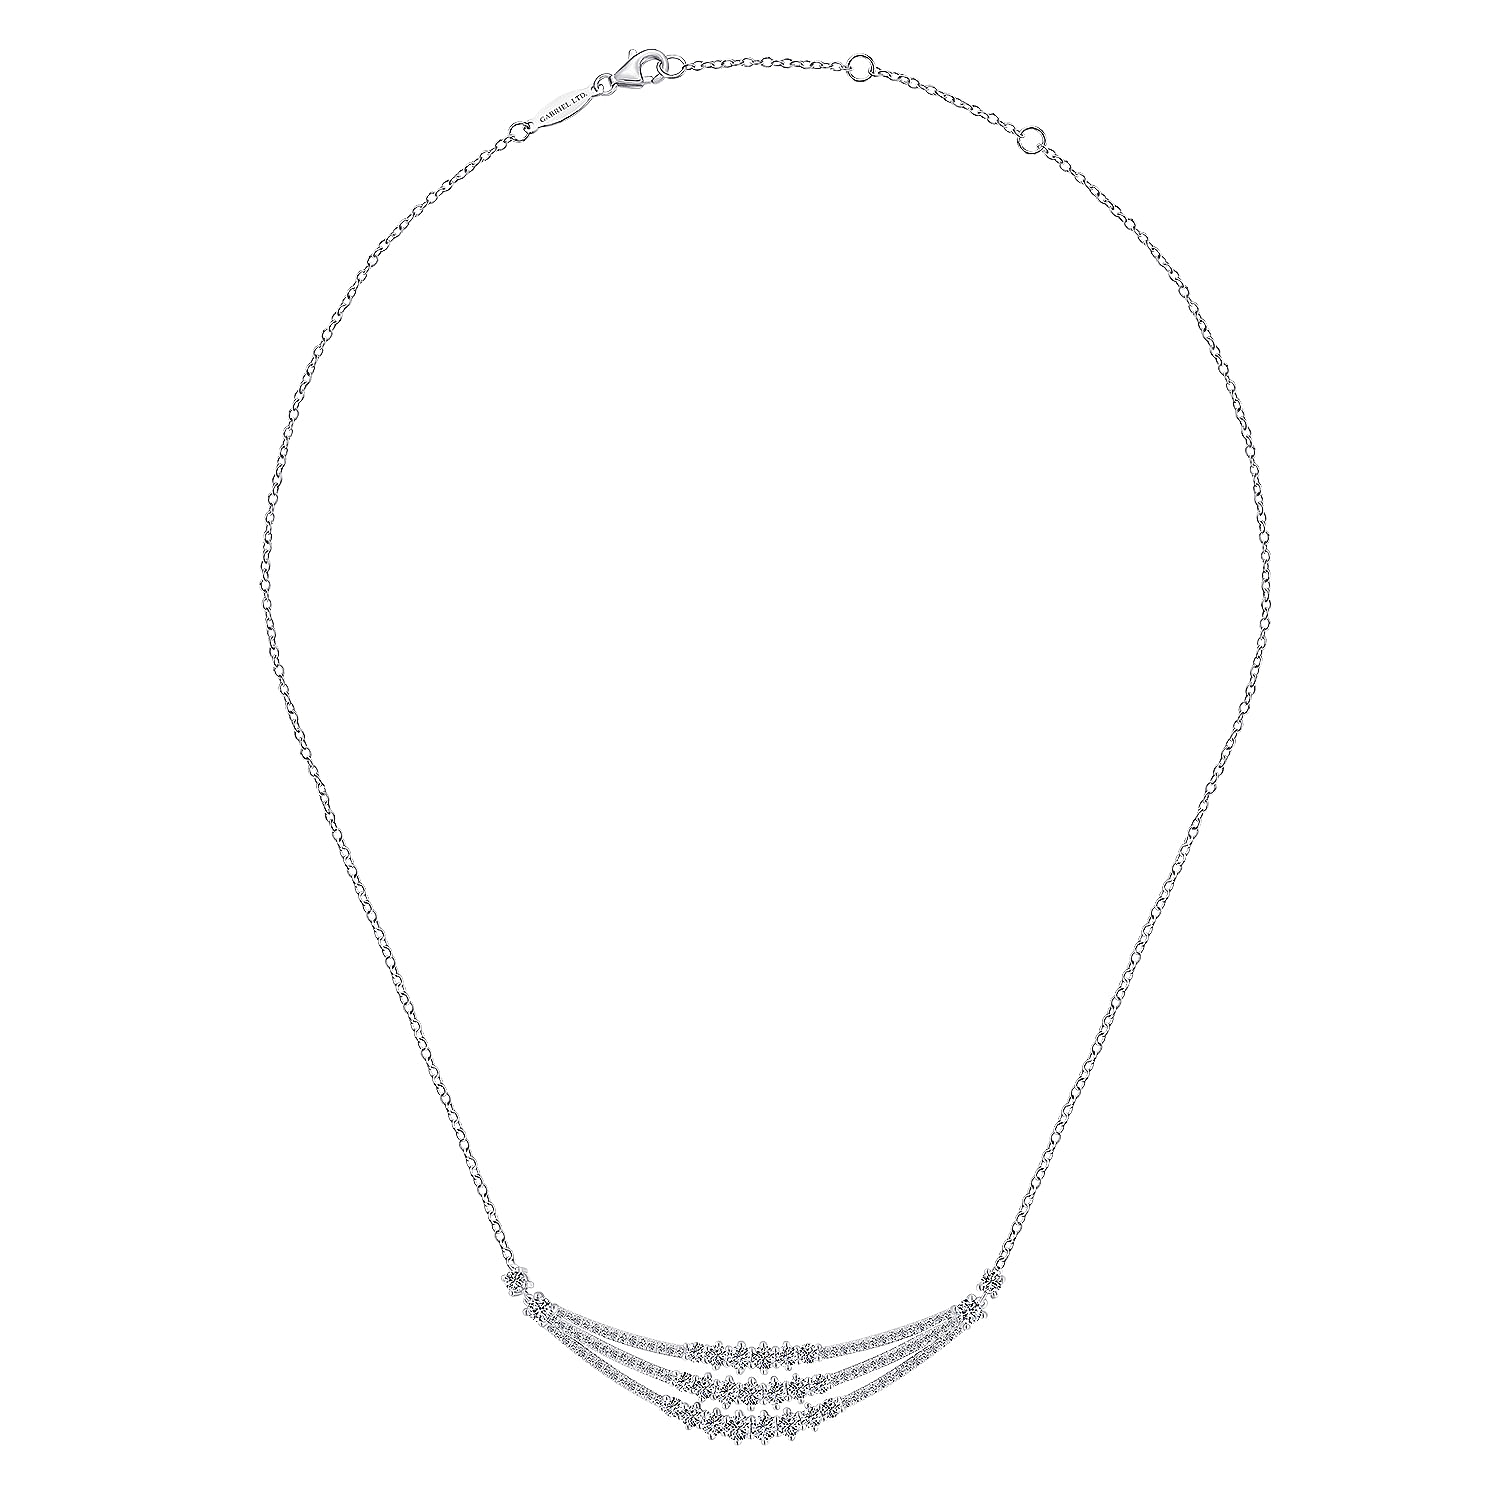 18K White Gold Curved Triple Diamond Bar Necklace